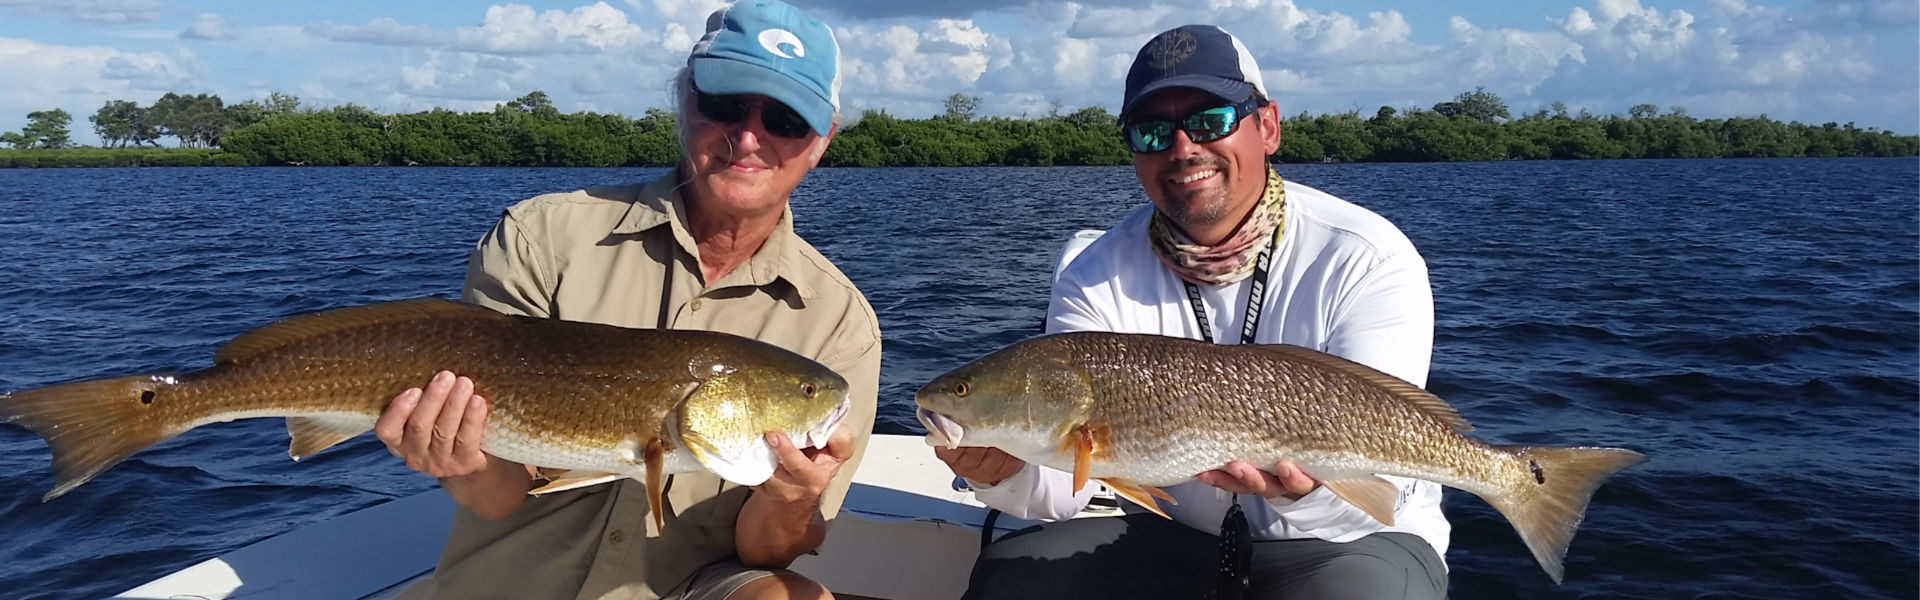 Catch Redfish with 5th Day Adventures